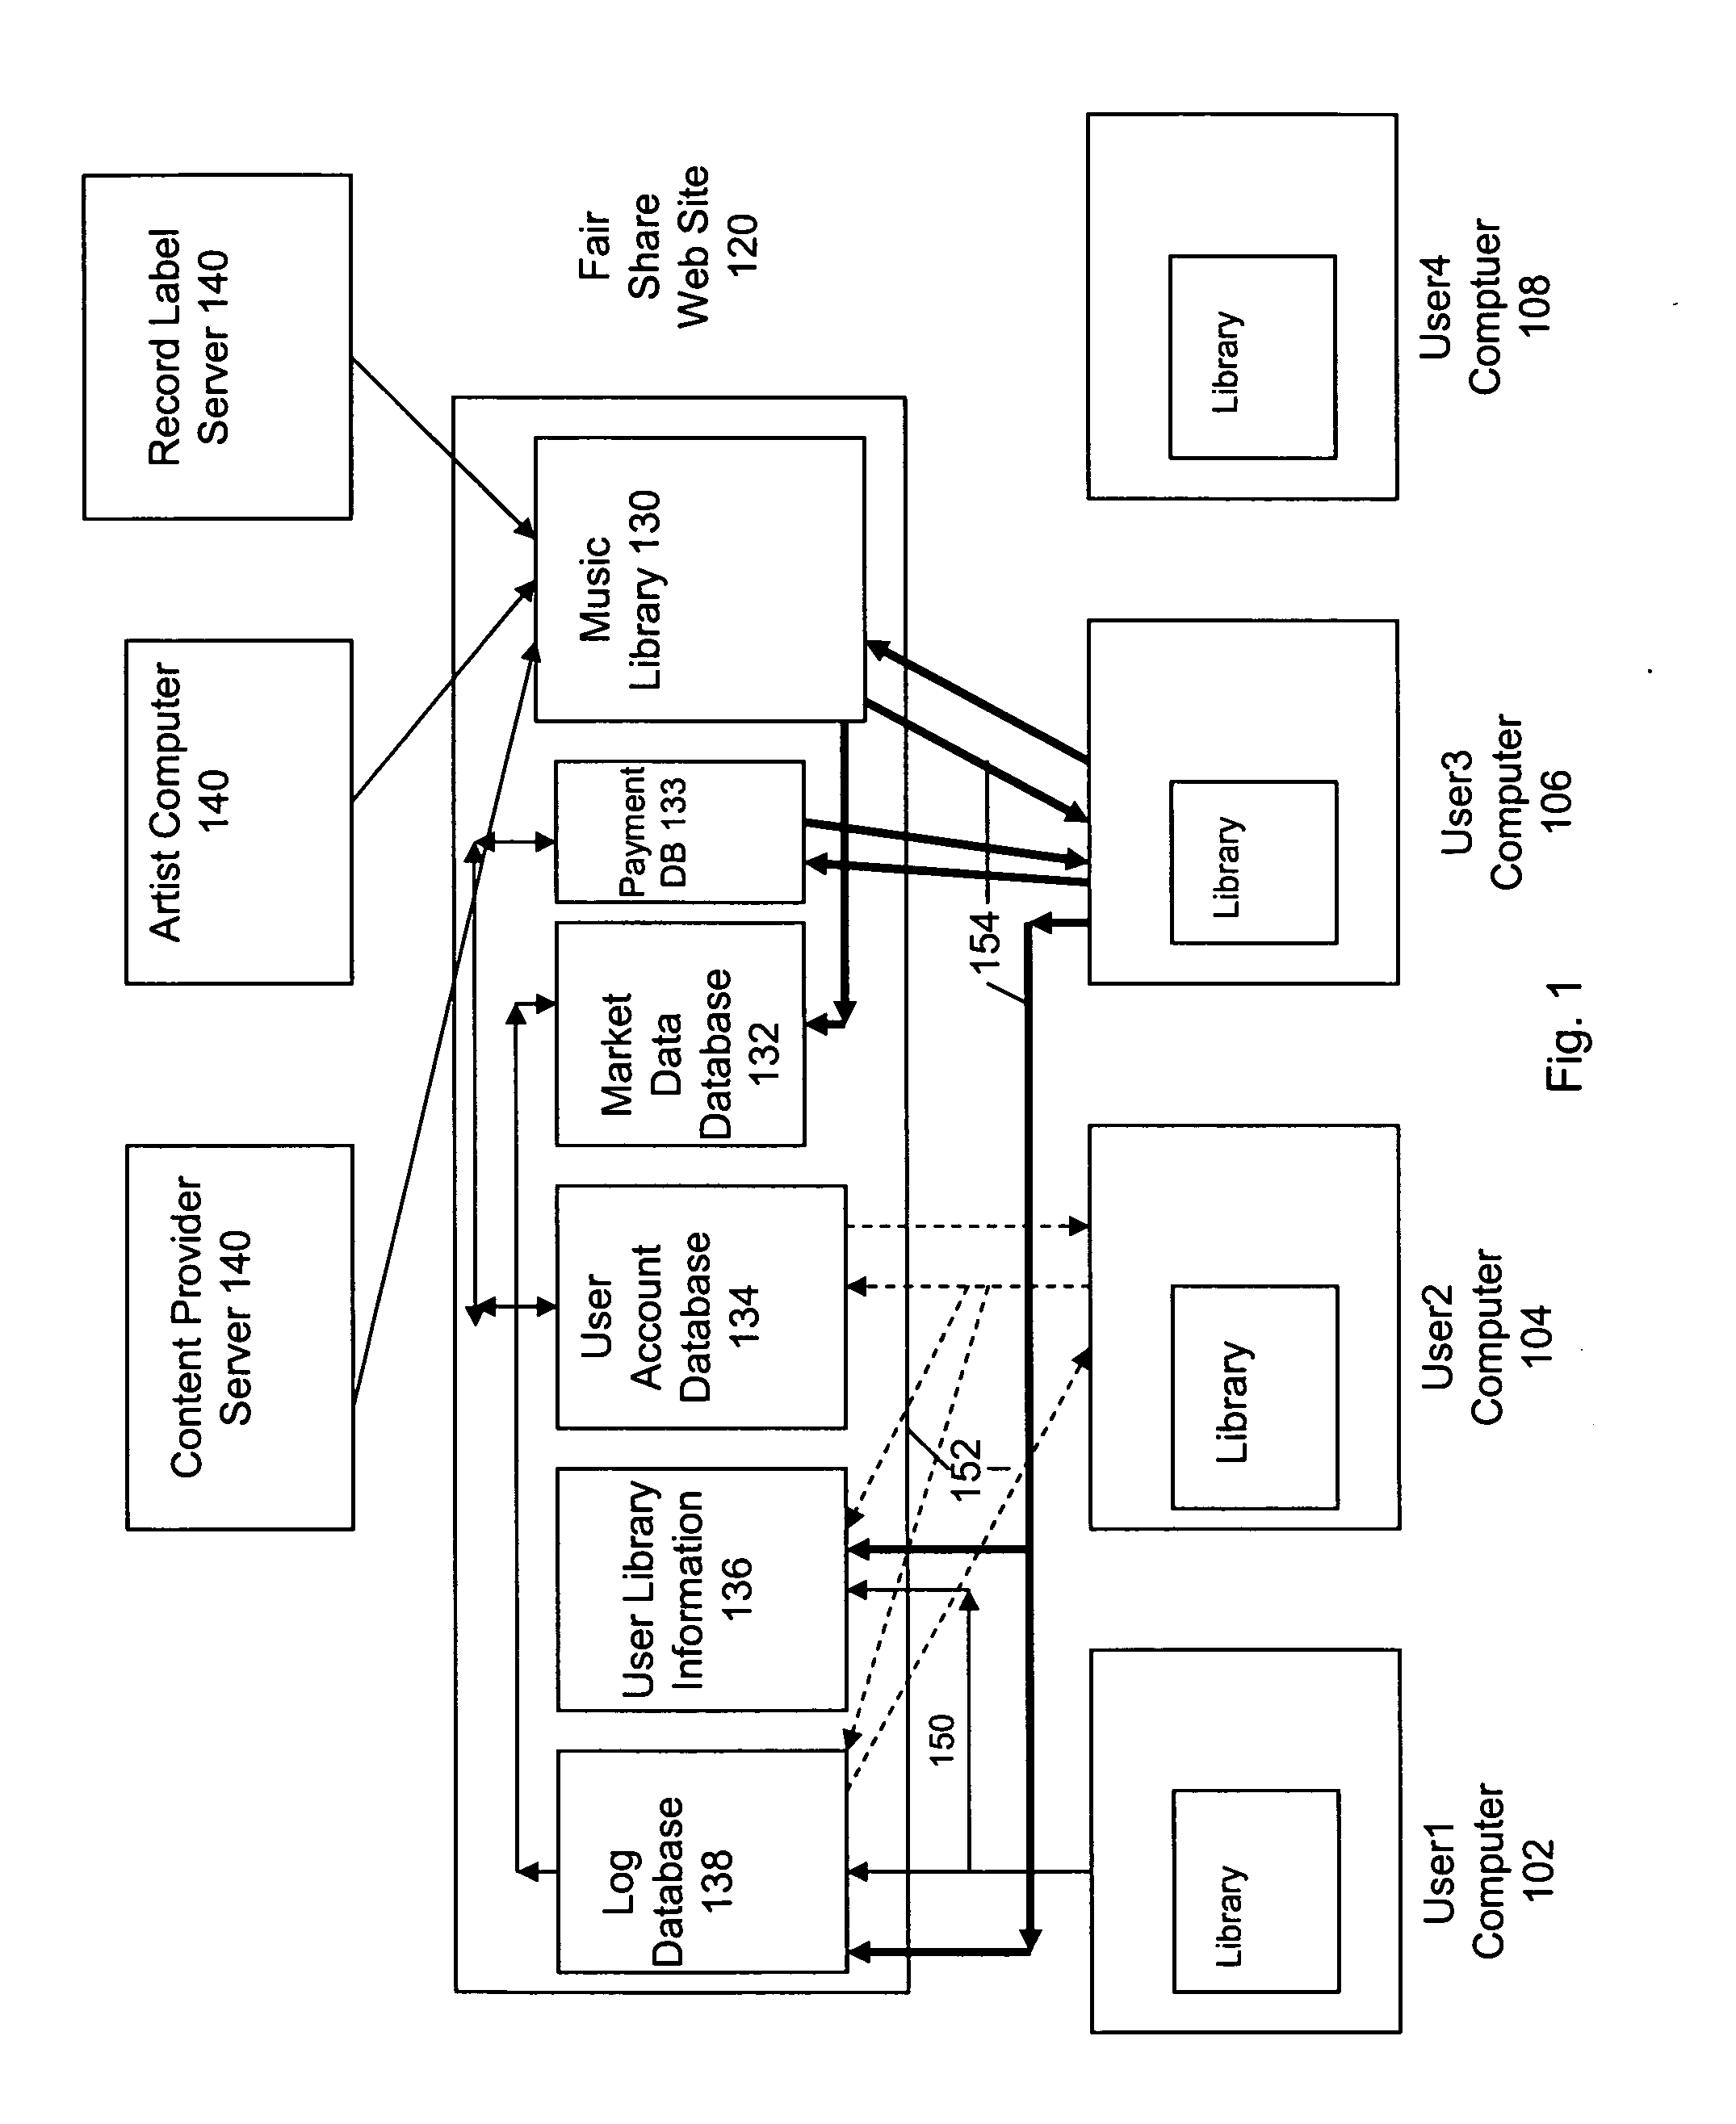 Digital media distribution and trading system used via a computer network